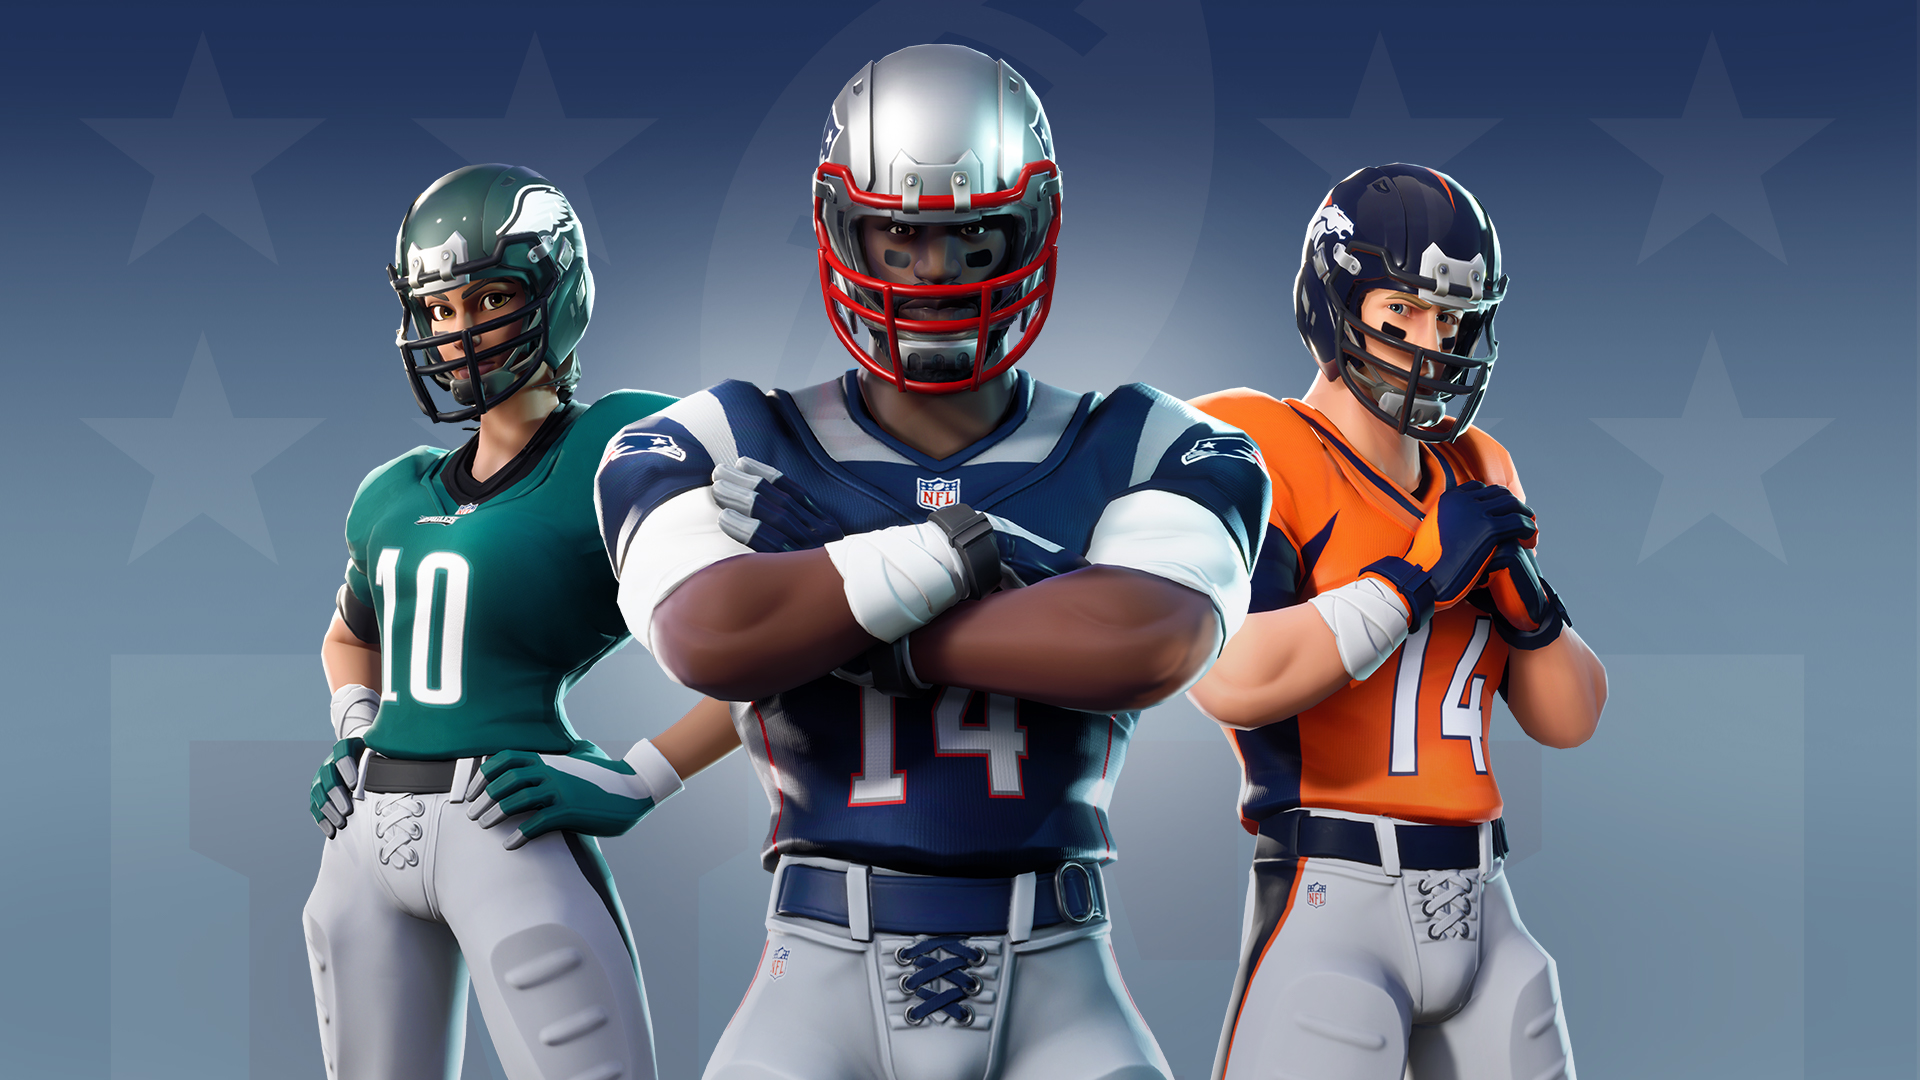 Fortnite V6 Leaked Cosmetics Reveal Nfl Set And The Likely